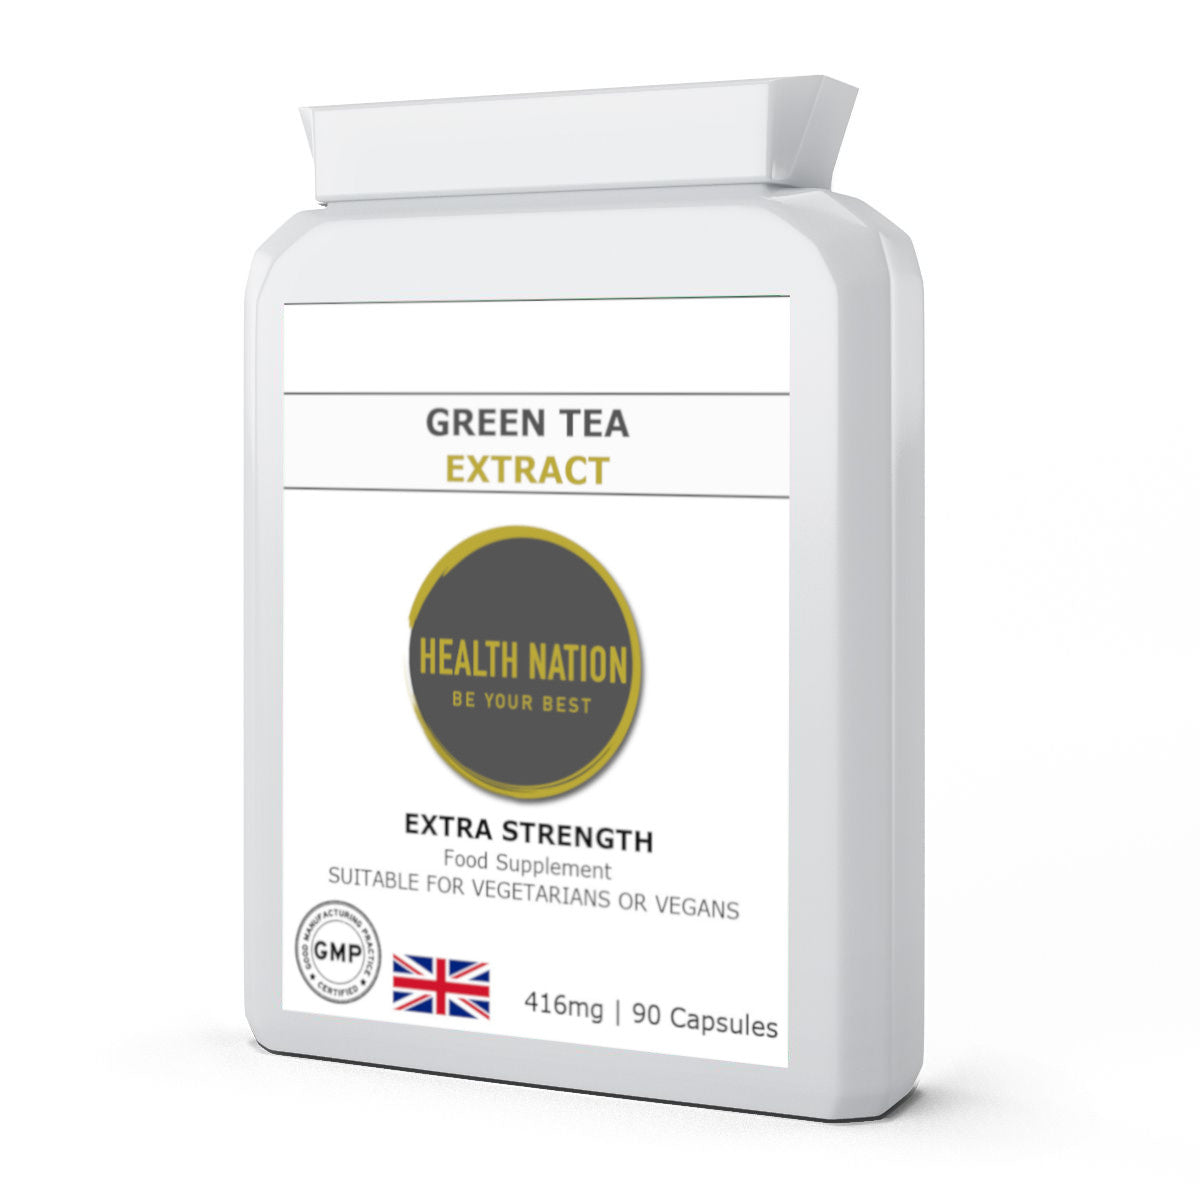 Green Tea 30:1 Extract 12 | Helps with Mood, Eye Health, Weight Loss, Anti-Ageing and Balances Blood Sugar | Made in UK | 12,480mg 90 Capsules - Health Nation